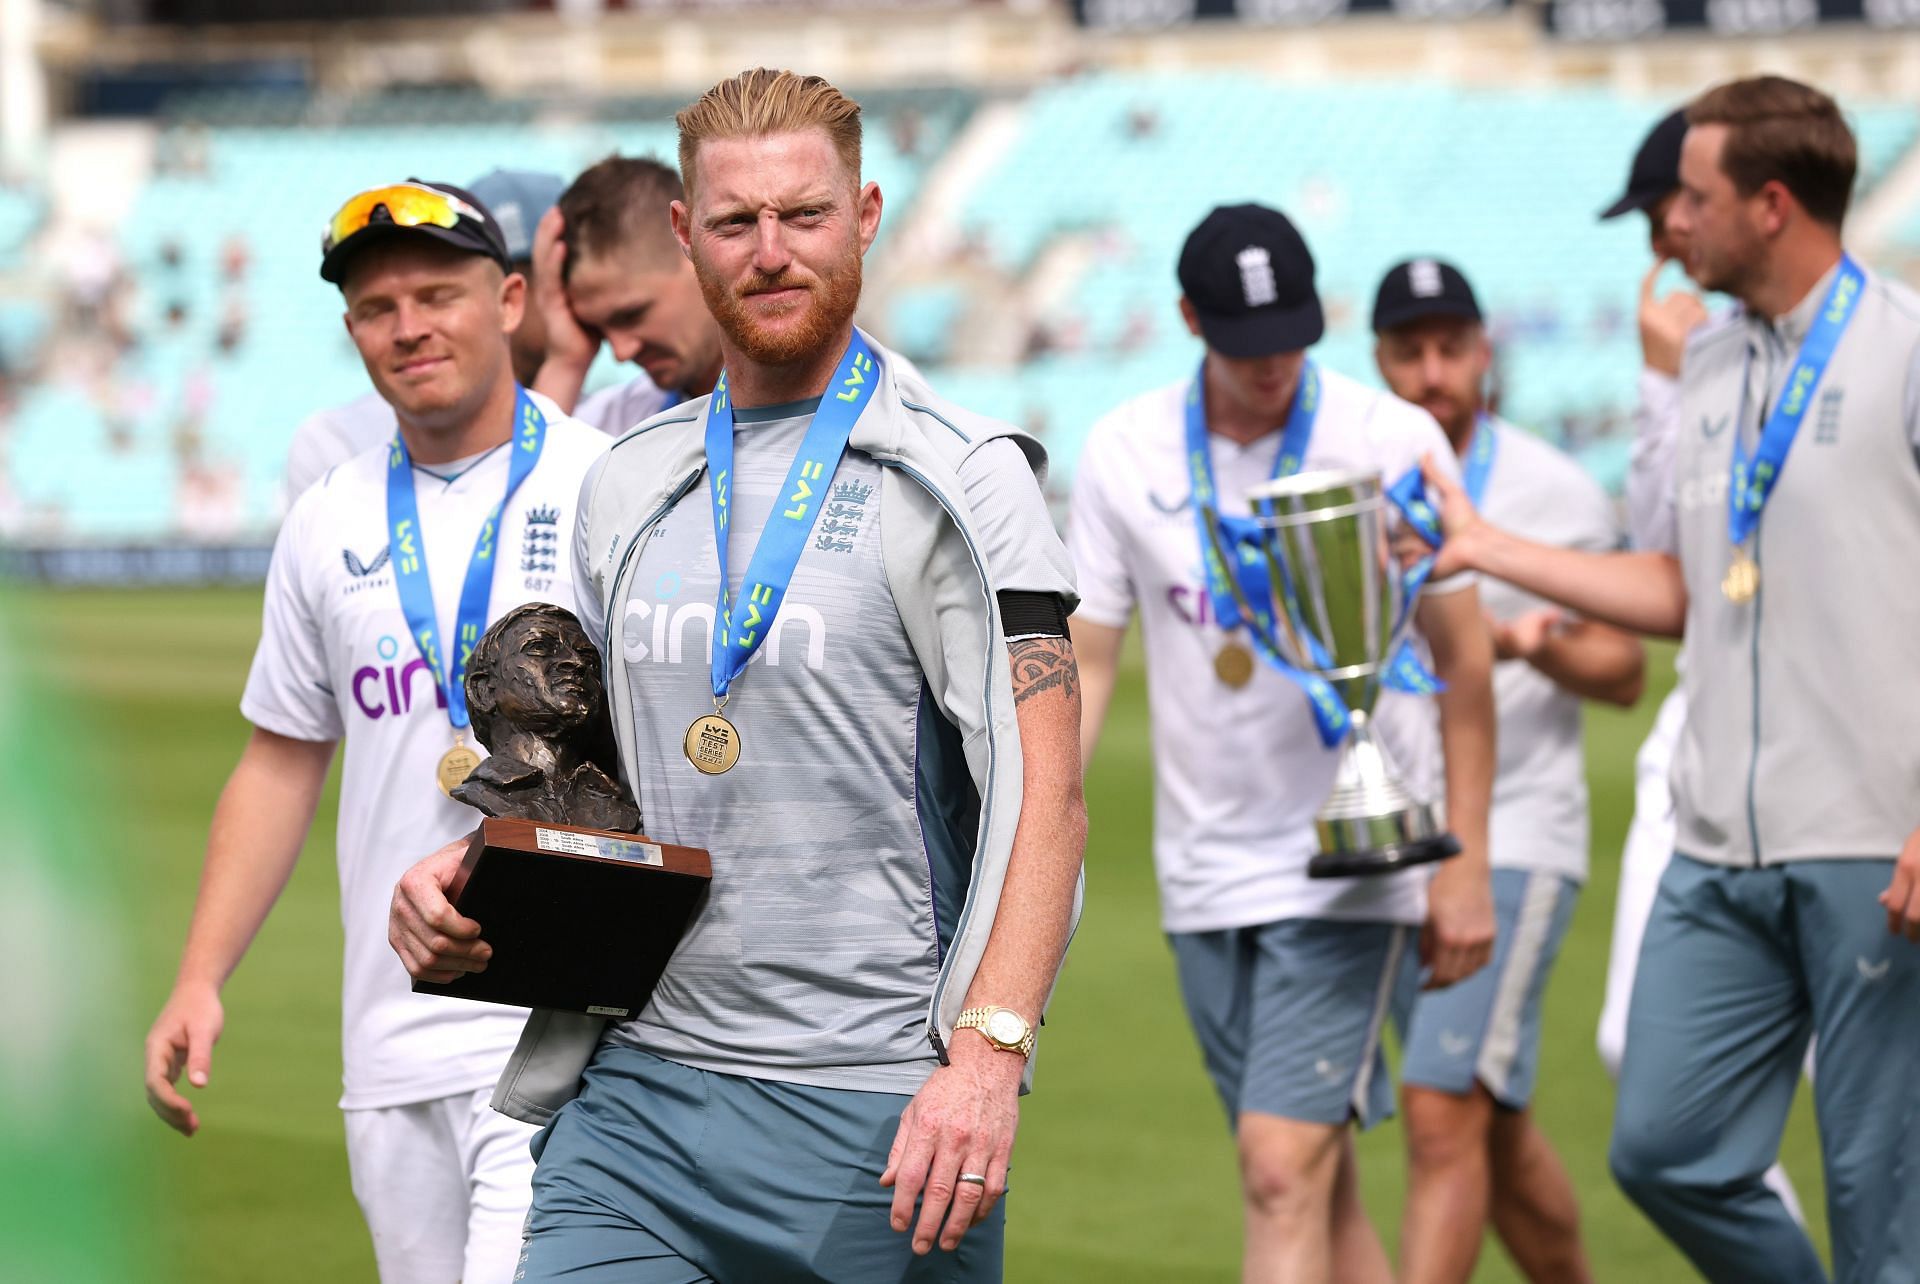 Ben Stokes has proved himself an able Test captain. (Credits: Getty)